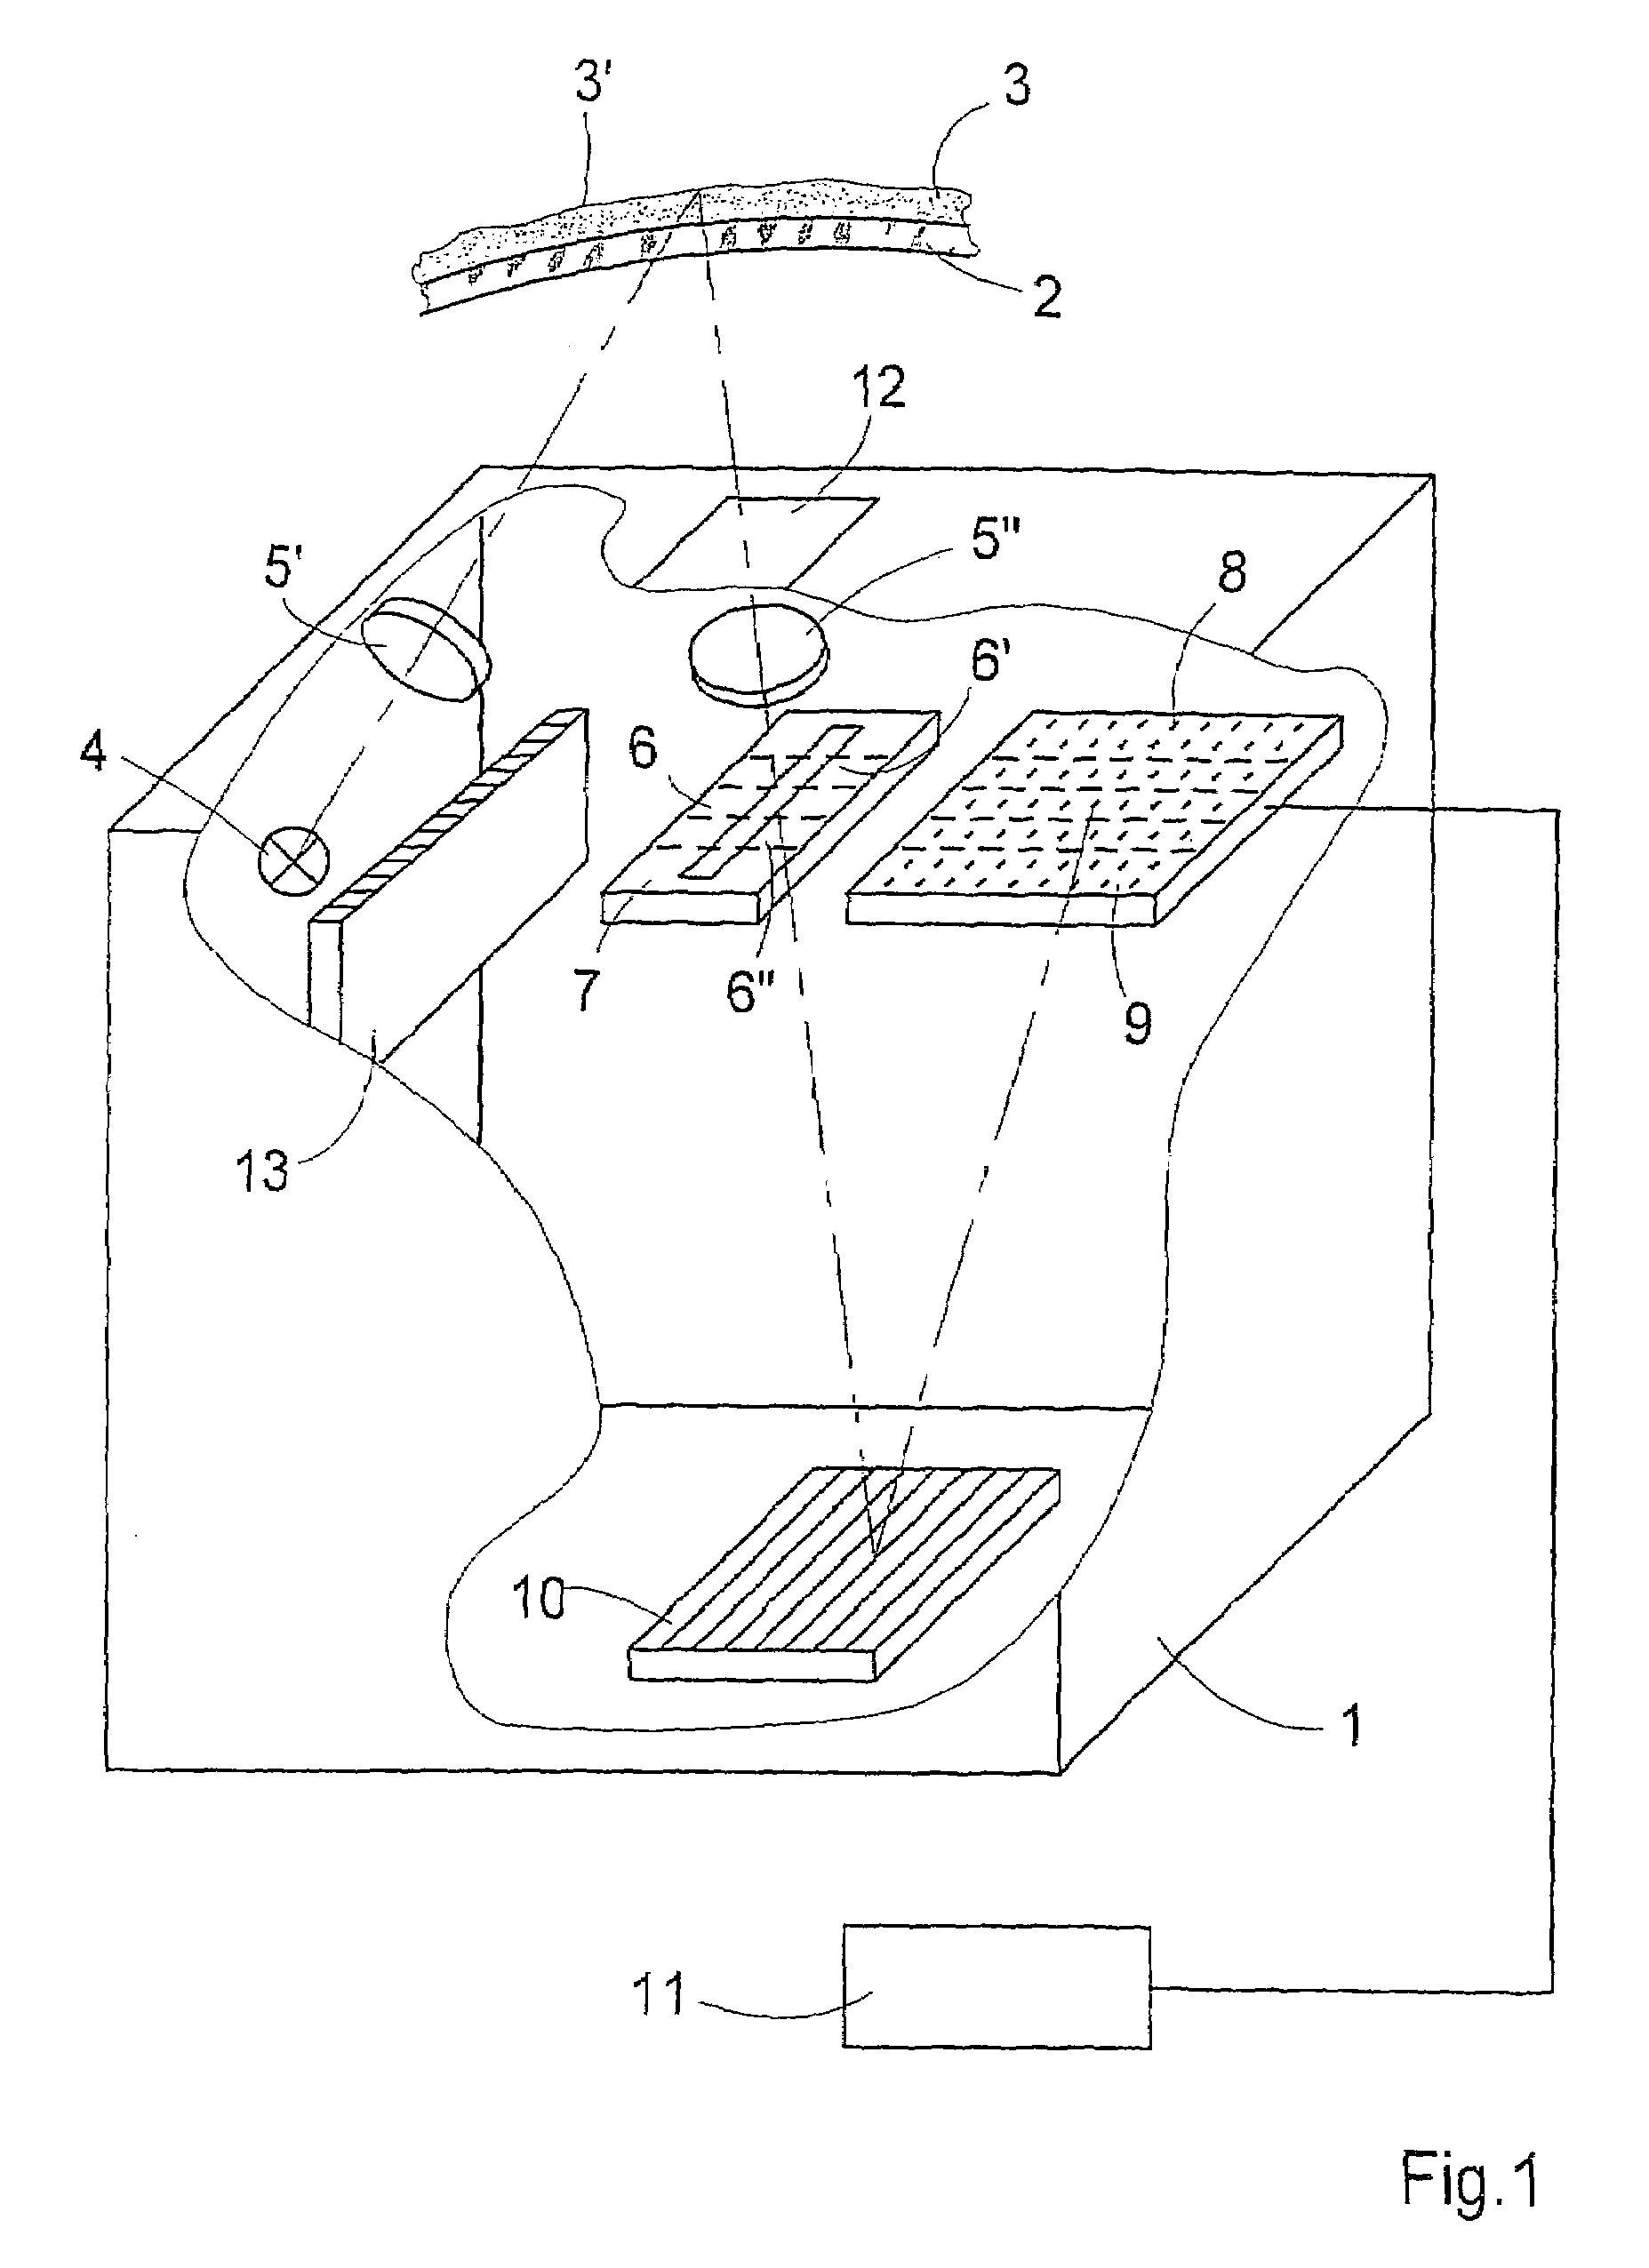 Assembly and method for identifying coatings lying on the surface of components and for determining their characteristics